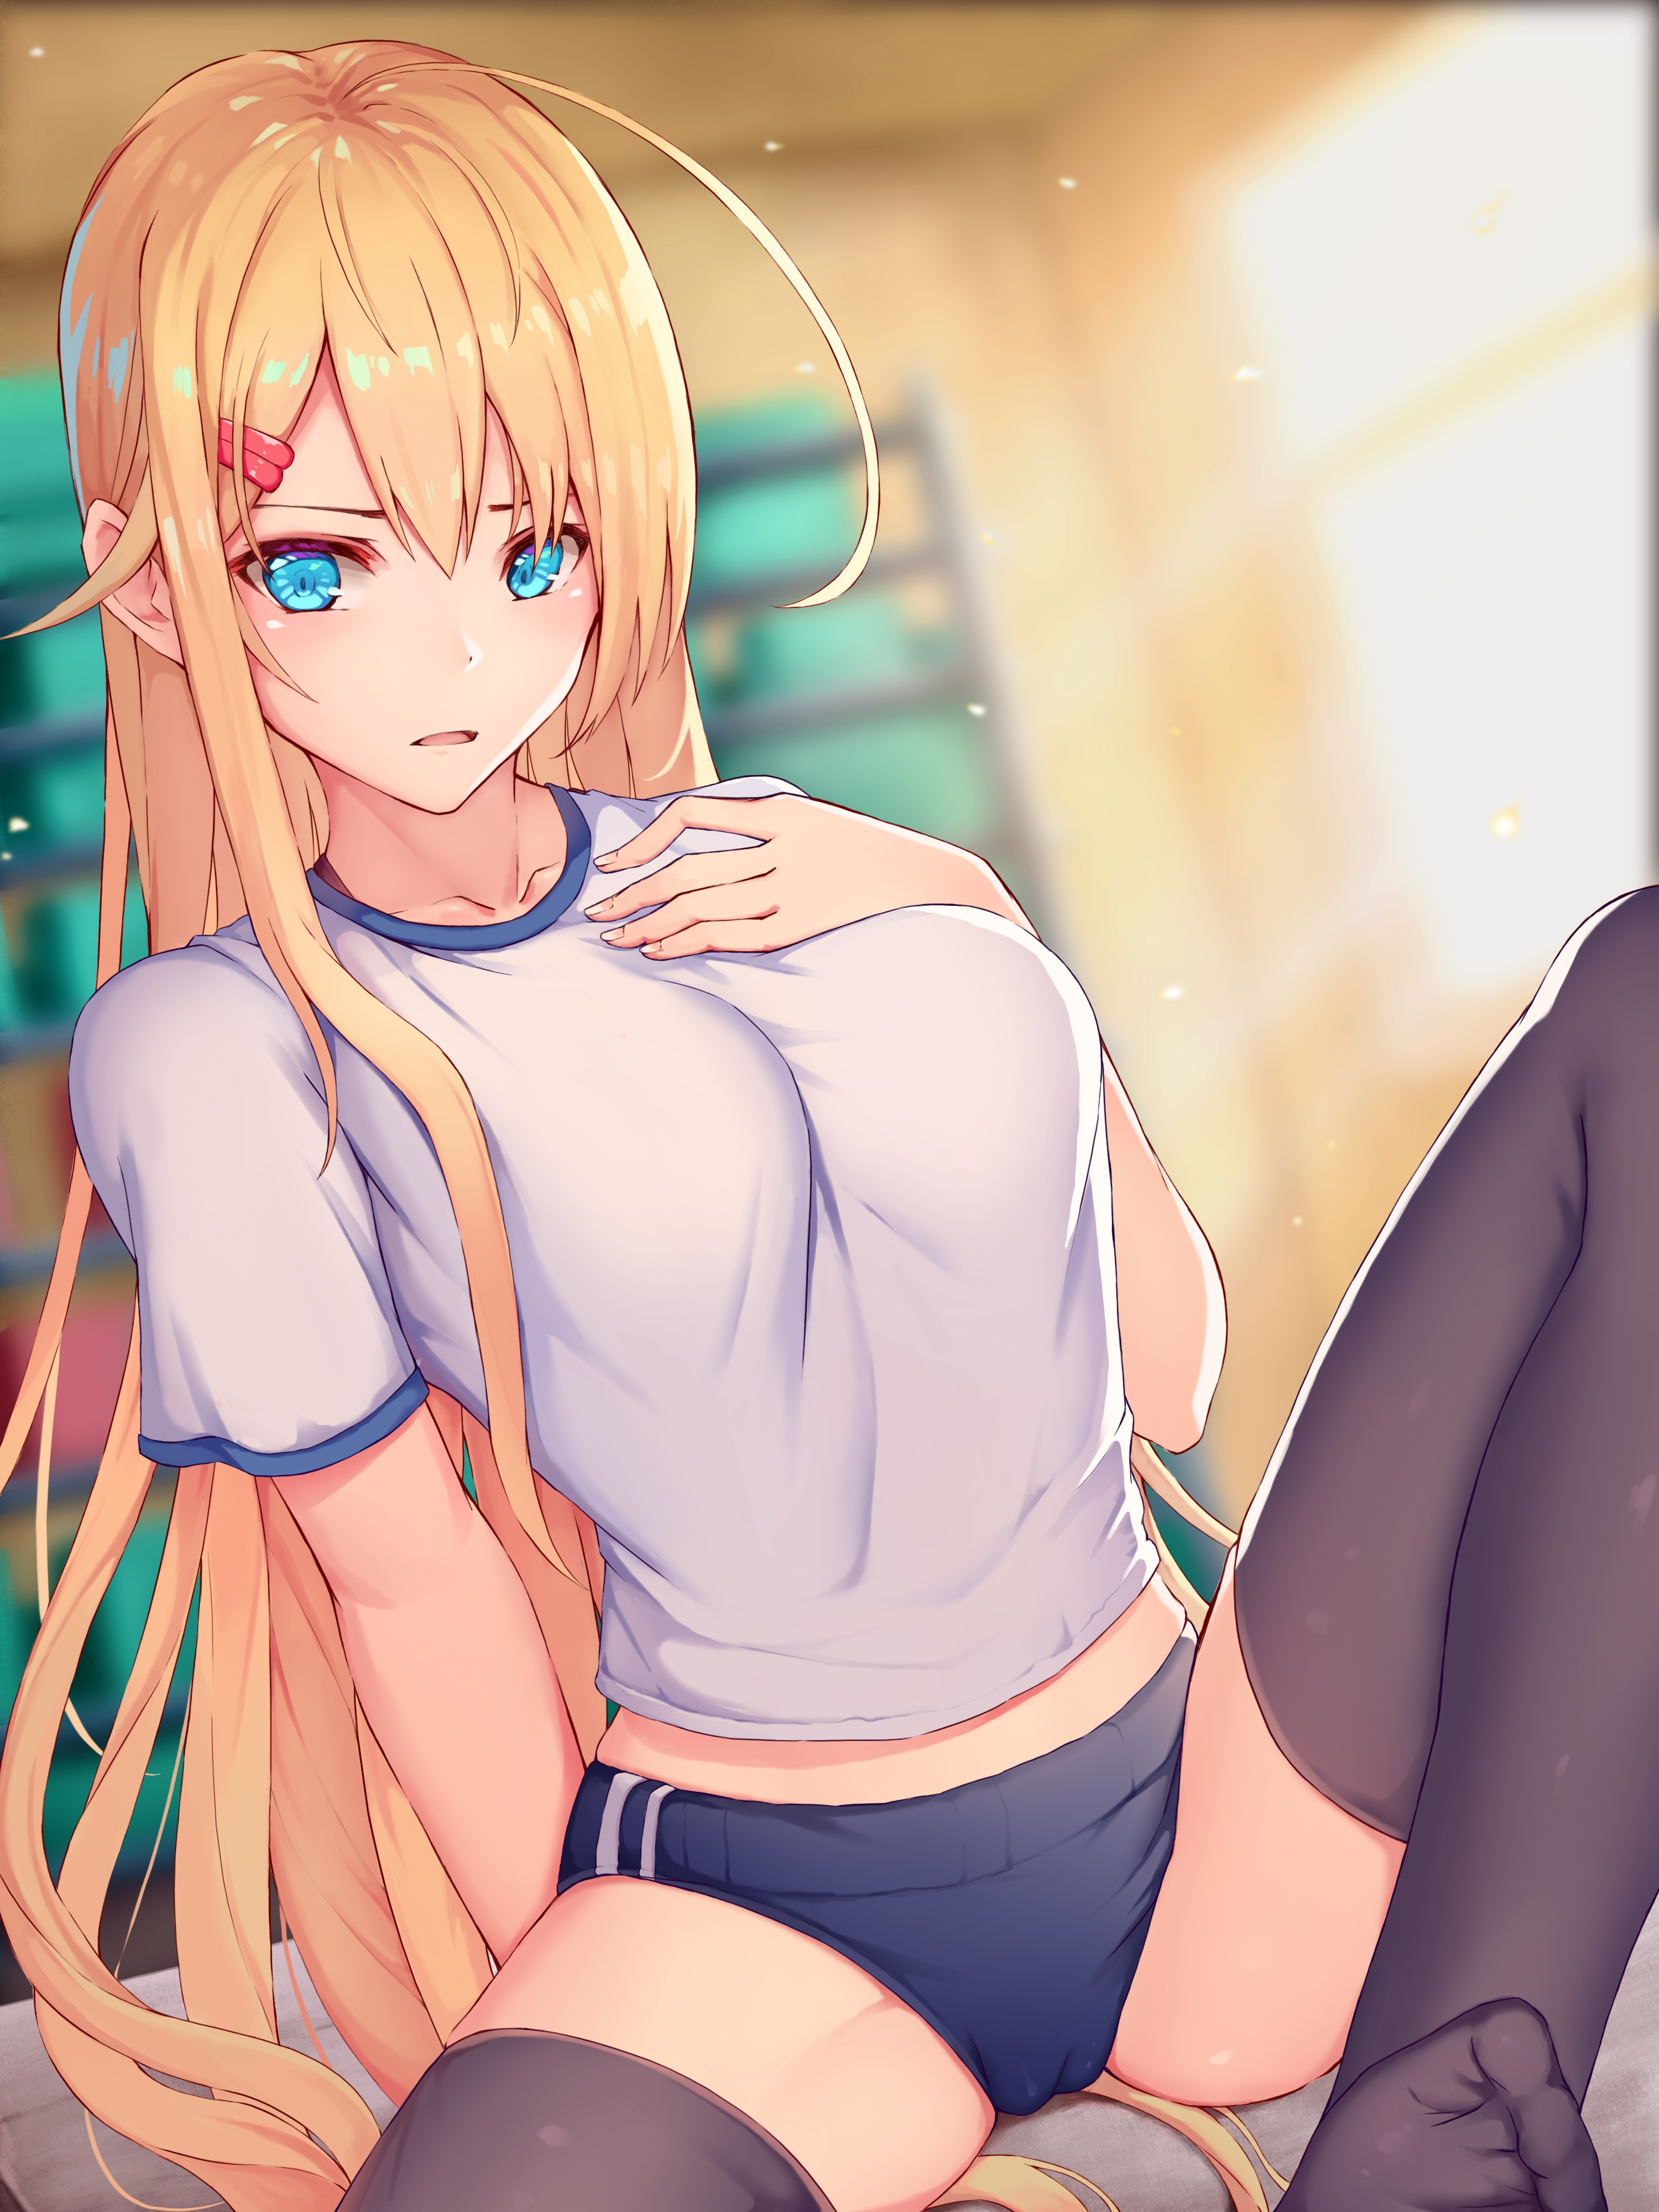 Anime 3000x4000 anime girls classroom blonde blue eyes long hair hairpins depth of field big boobs open mouth looking at viewer hands on chest sitting artwork anime gym clothes thigh-highs spread legs Rafael-M naked cape